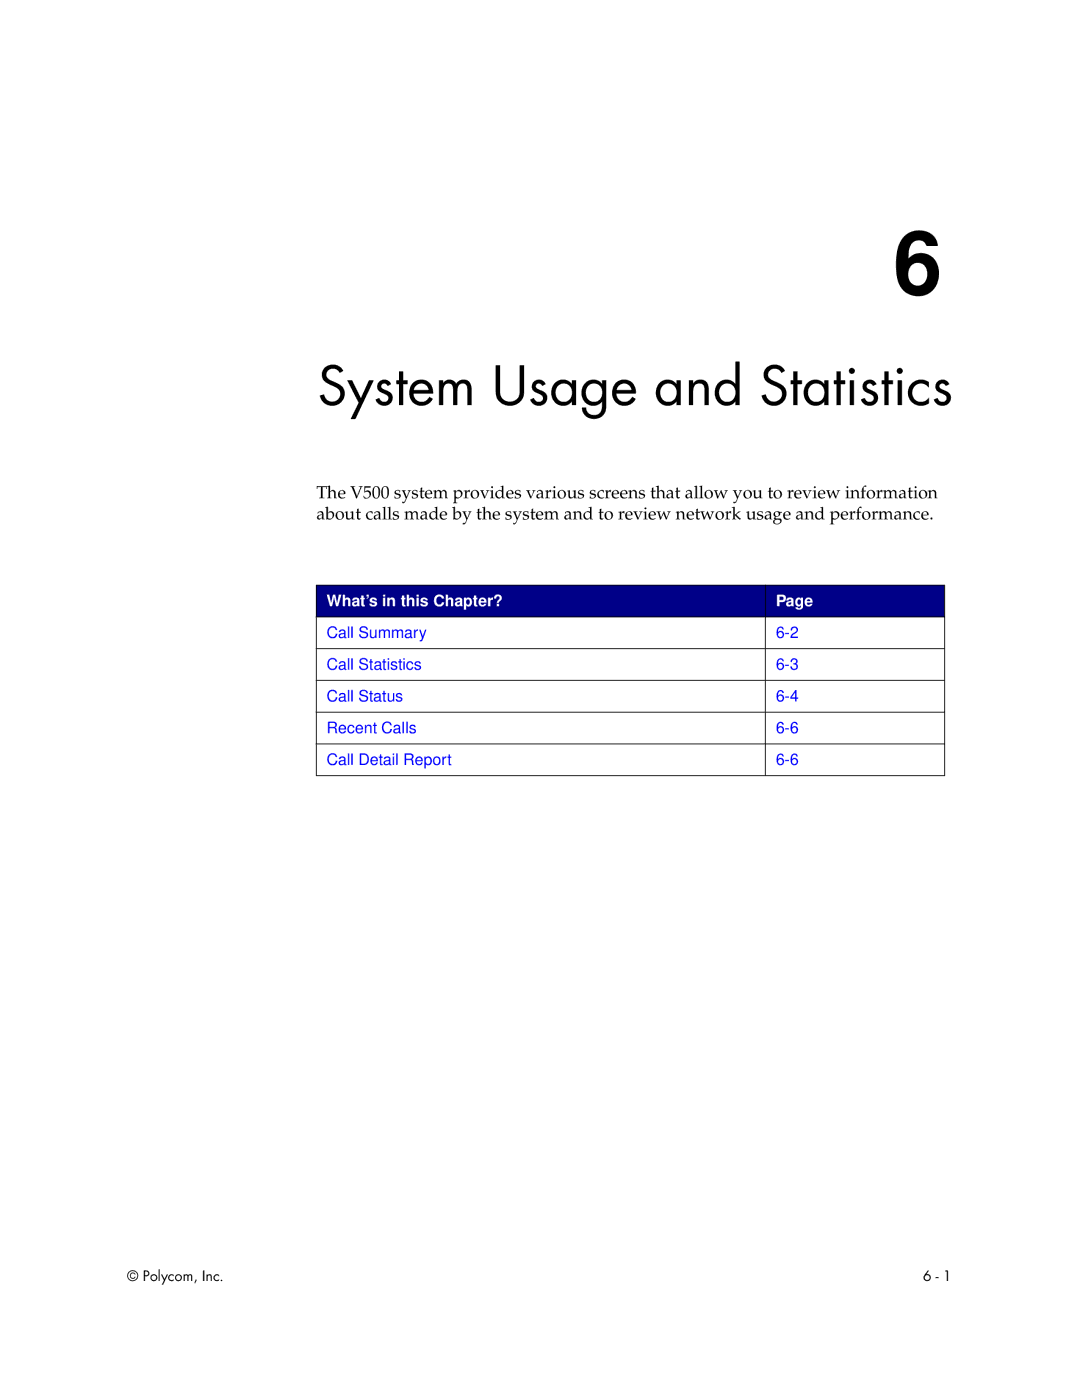 Polycom V500 manual System Usage and Statistics, What’s in this Chapter? 